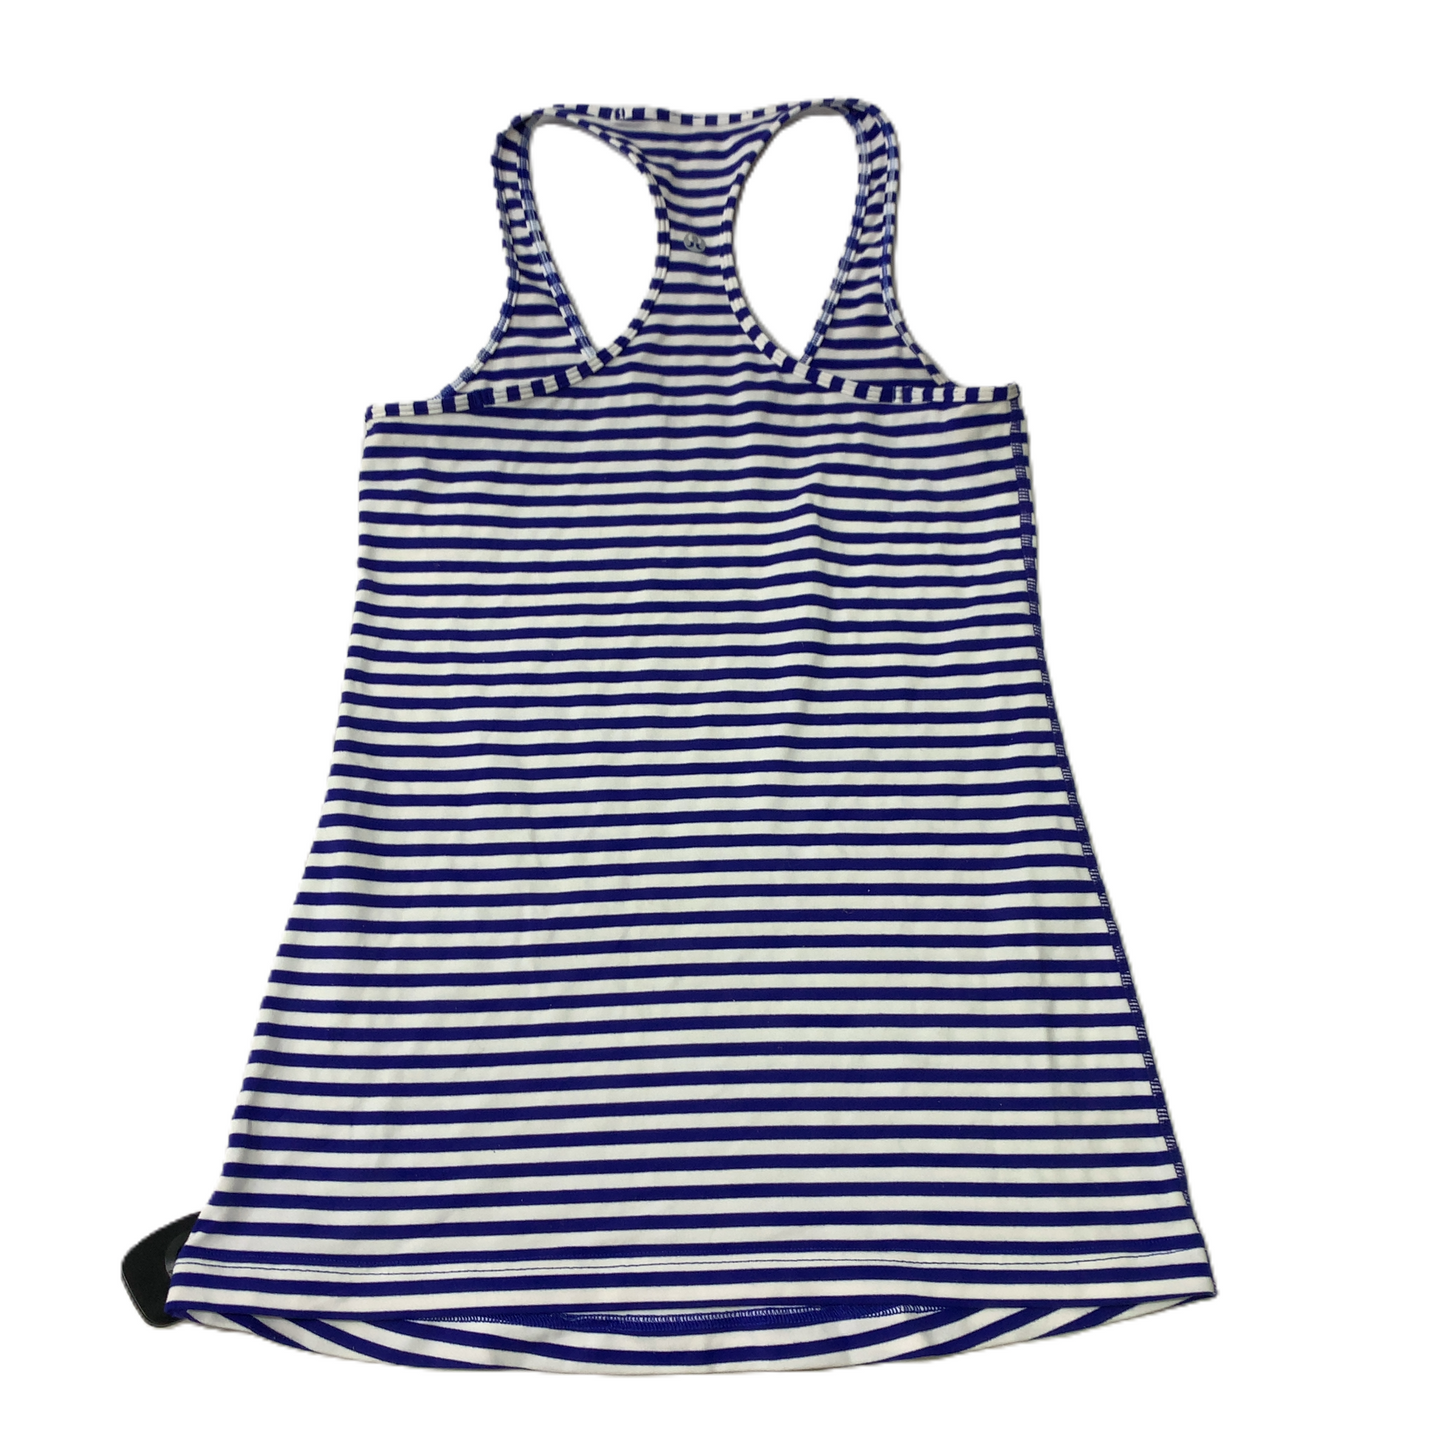 Blue  Athletic Tank Top By Lululemon  Size: M